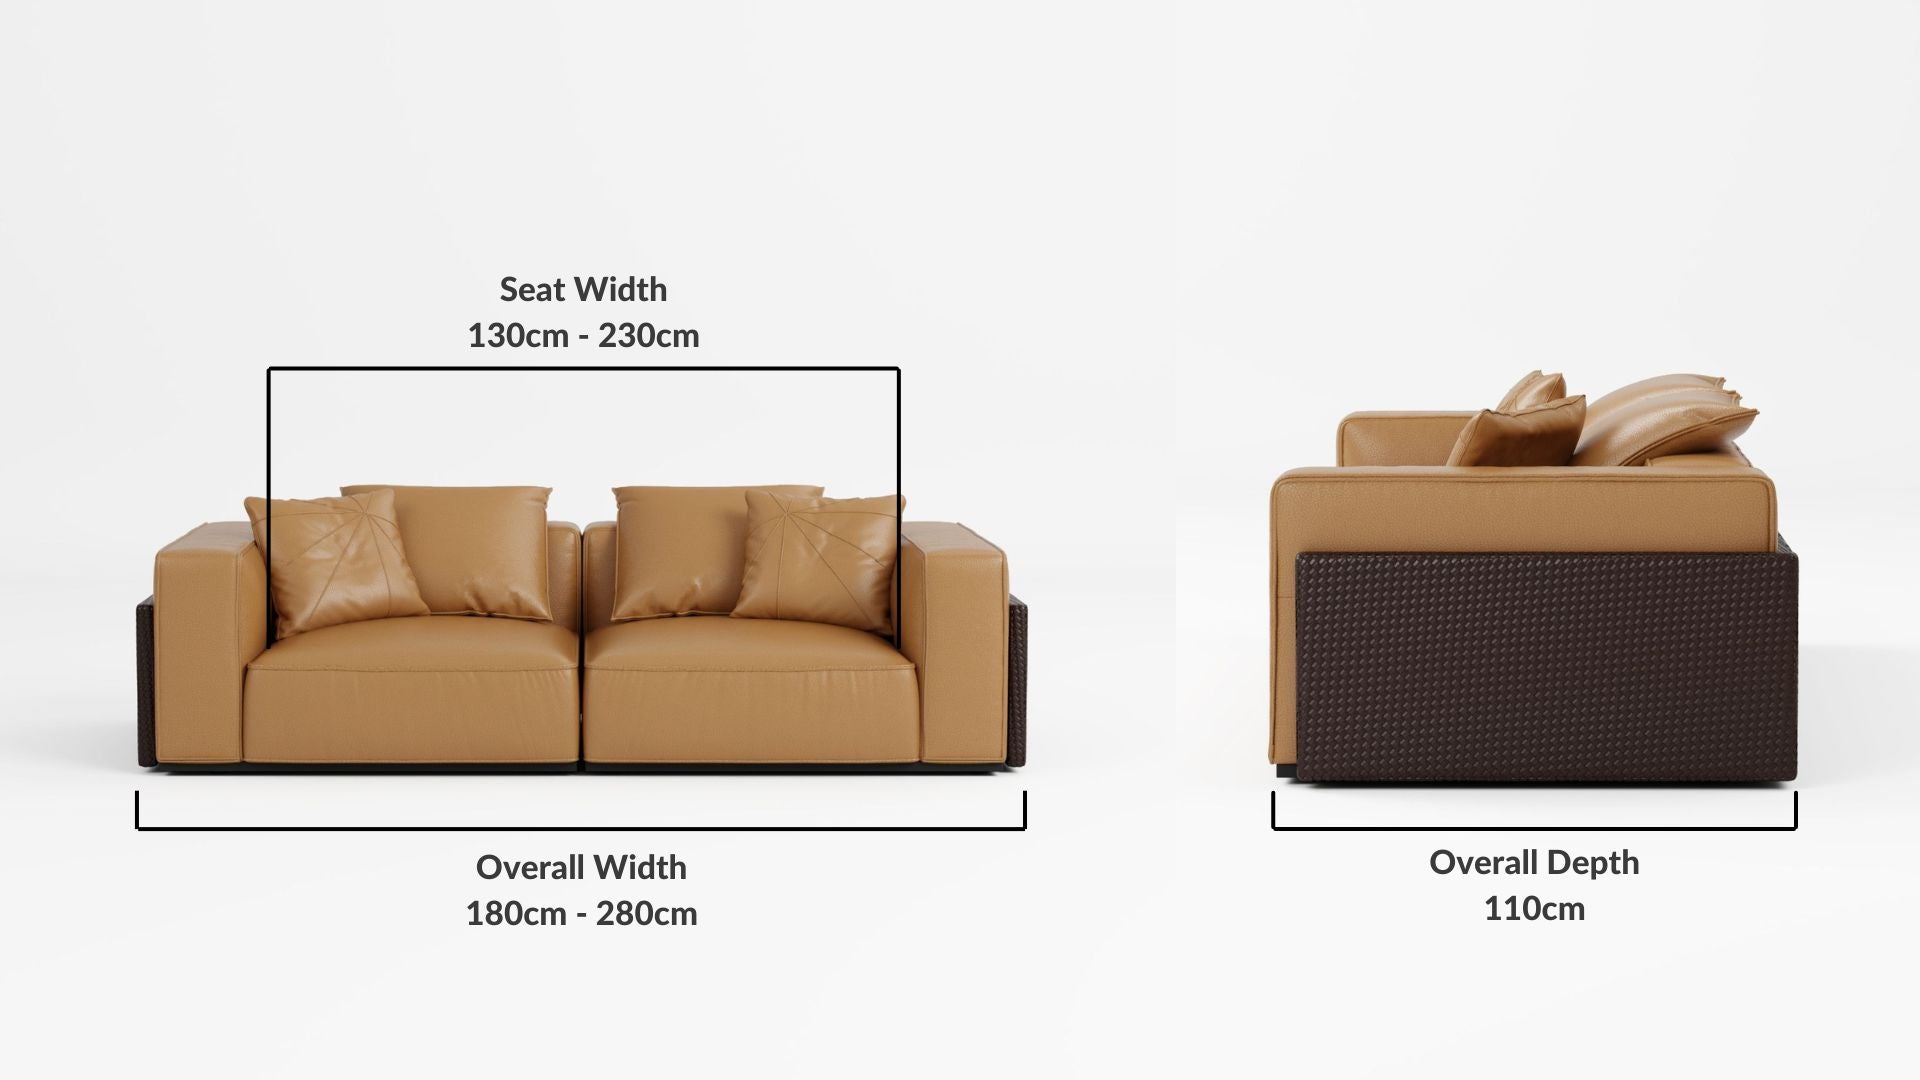 Details the key dimensions in terms of overall width, overall depth and seat width for Carson Half Leather Sofa